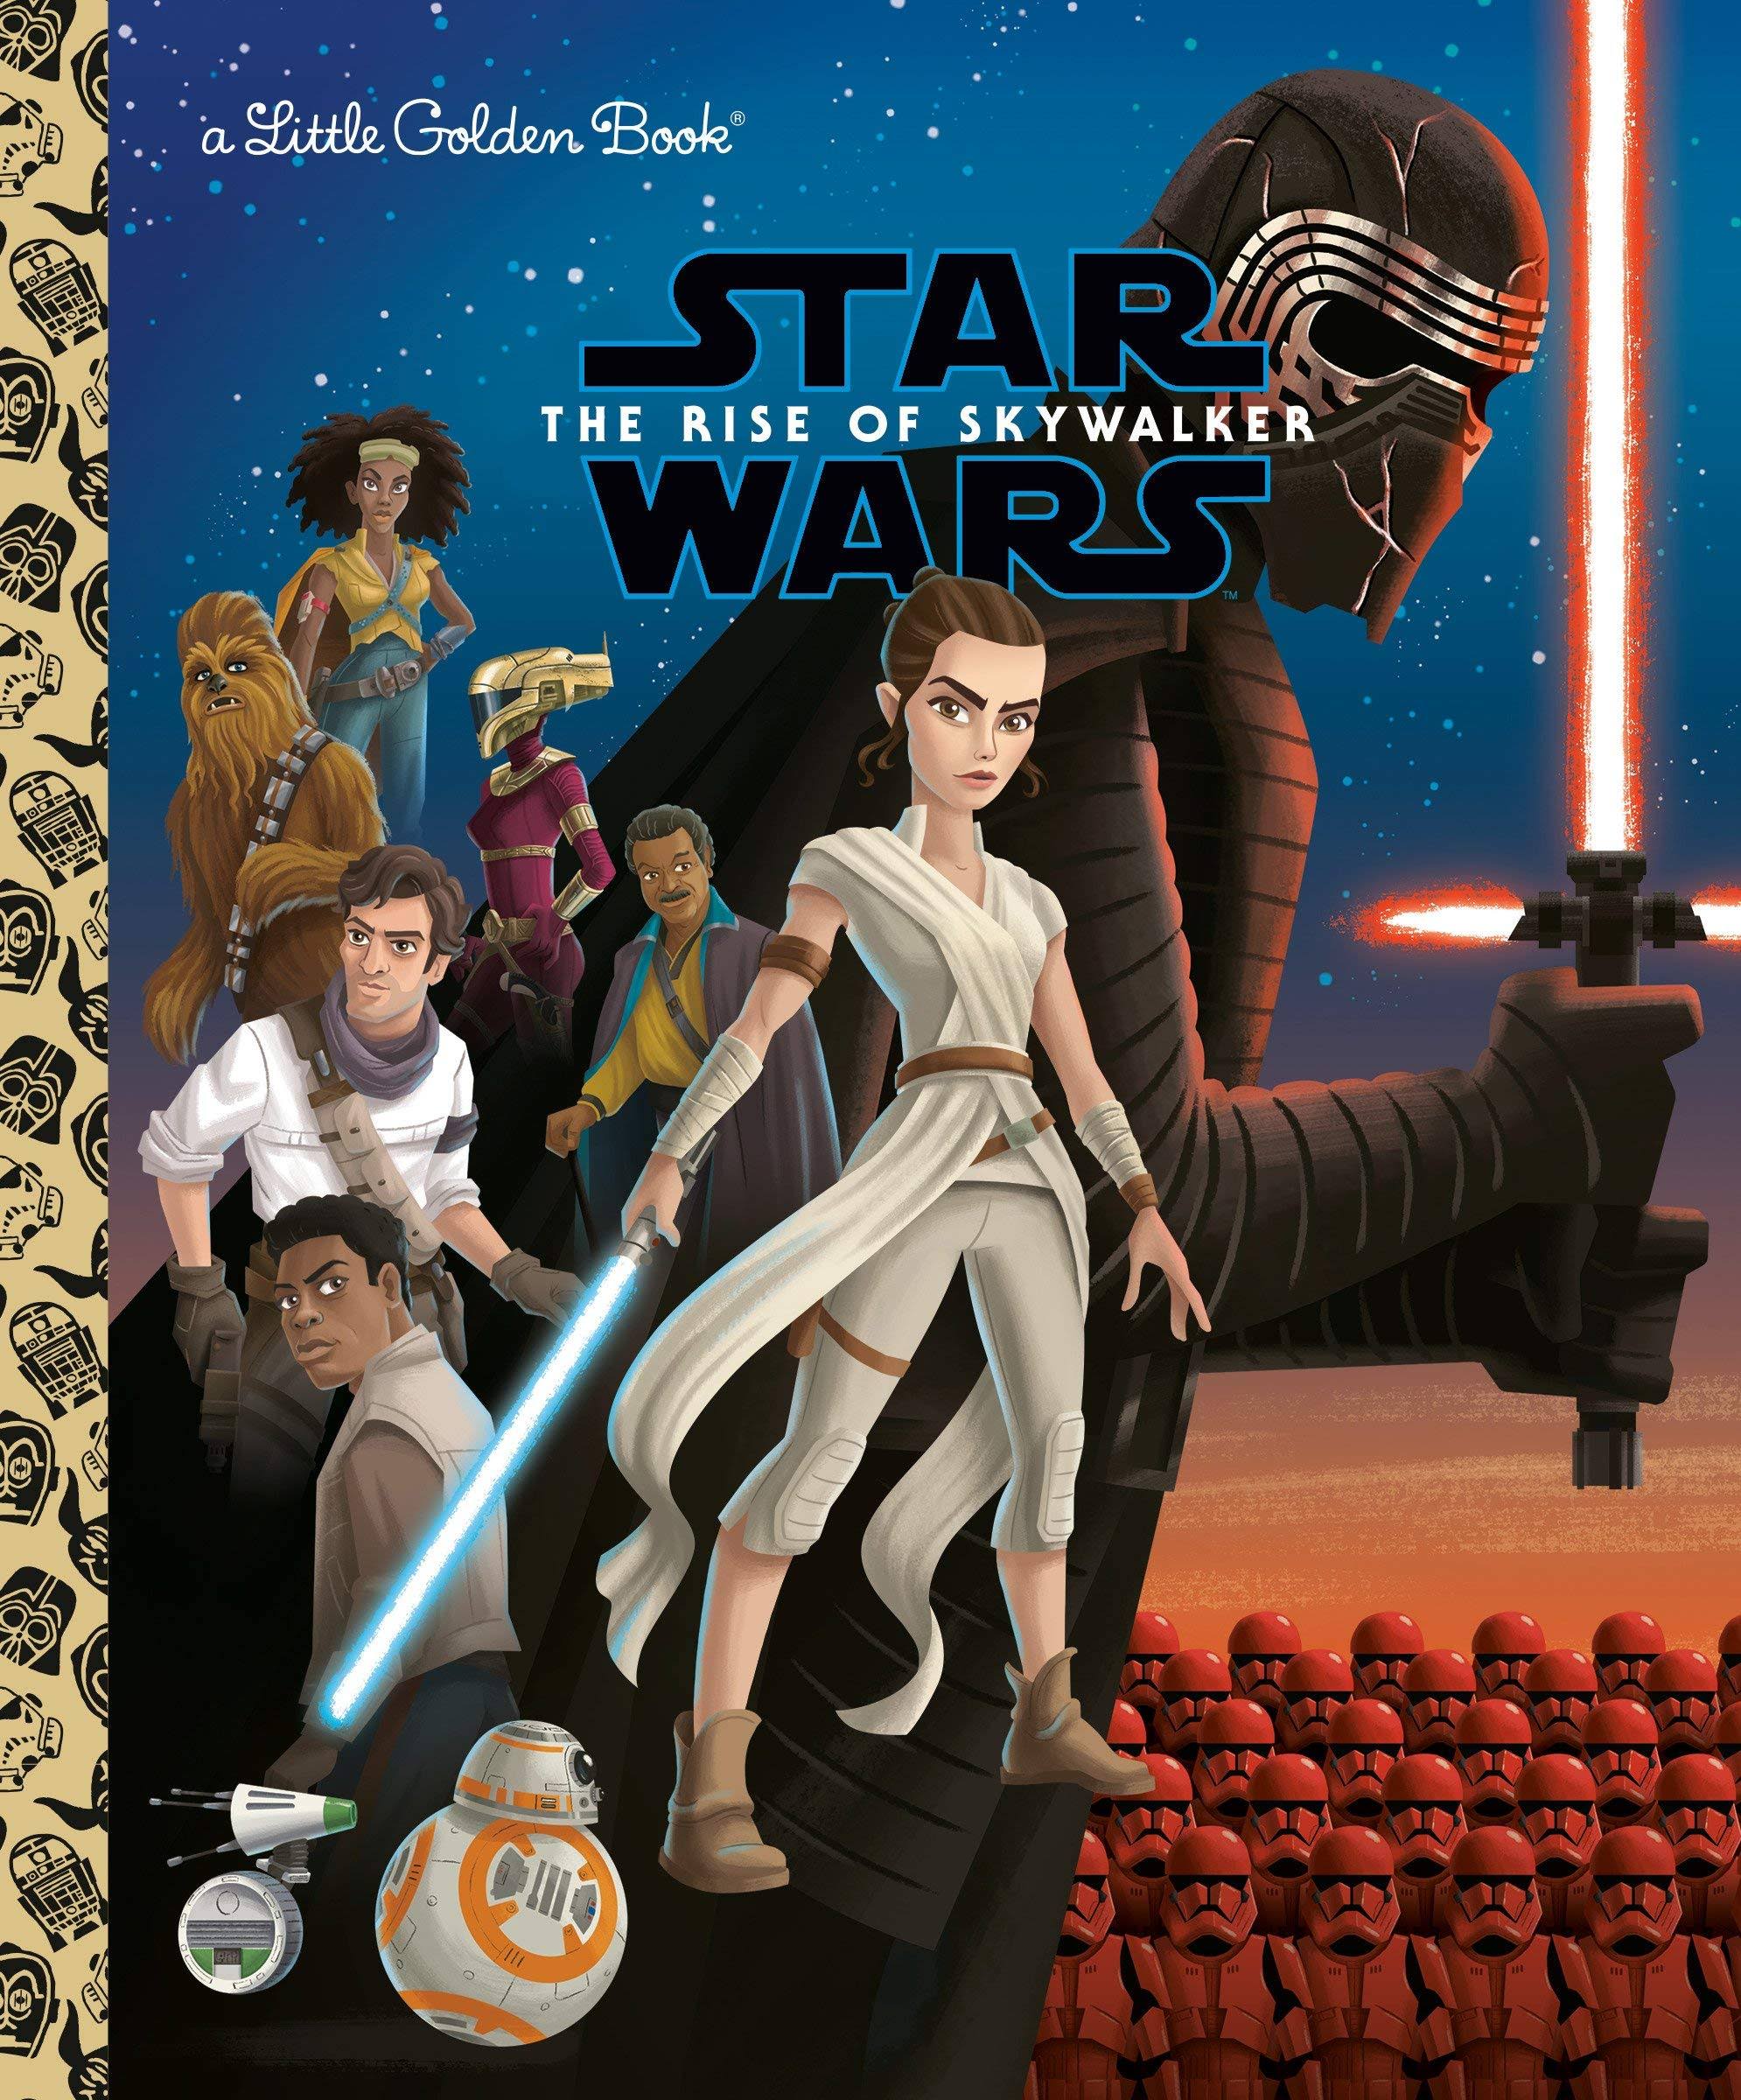 The Rise of Skywalker (Star Wars) by Golden Books